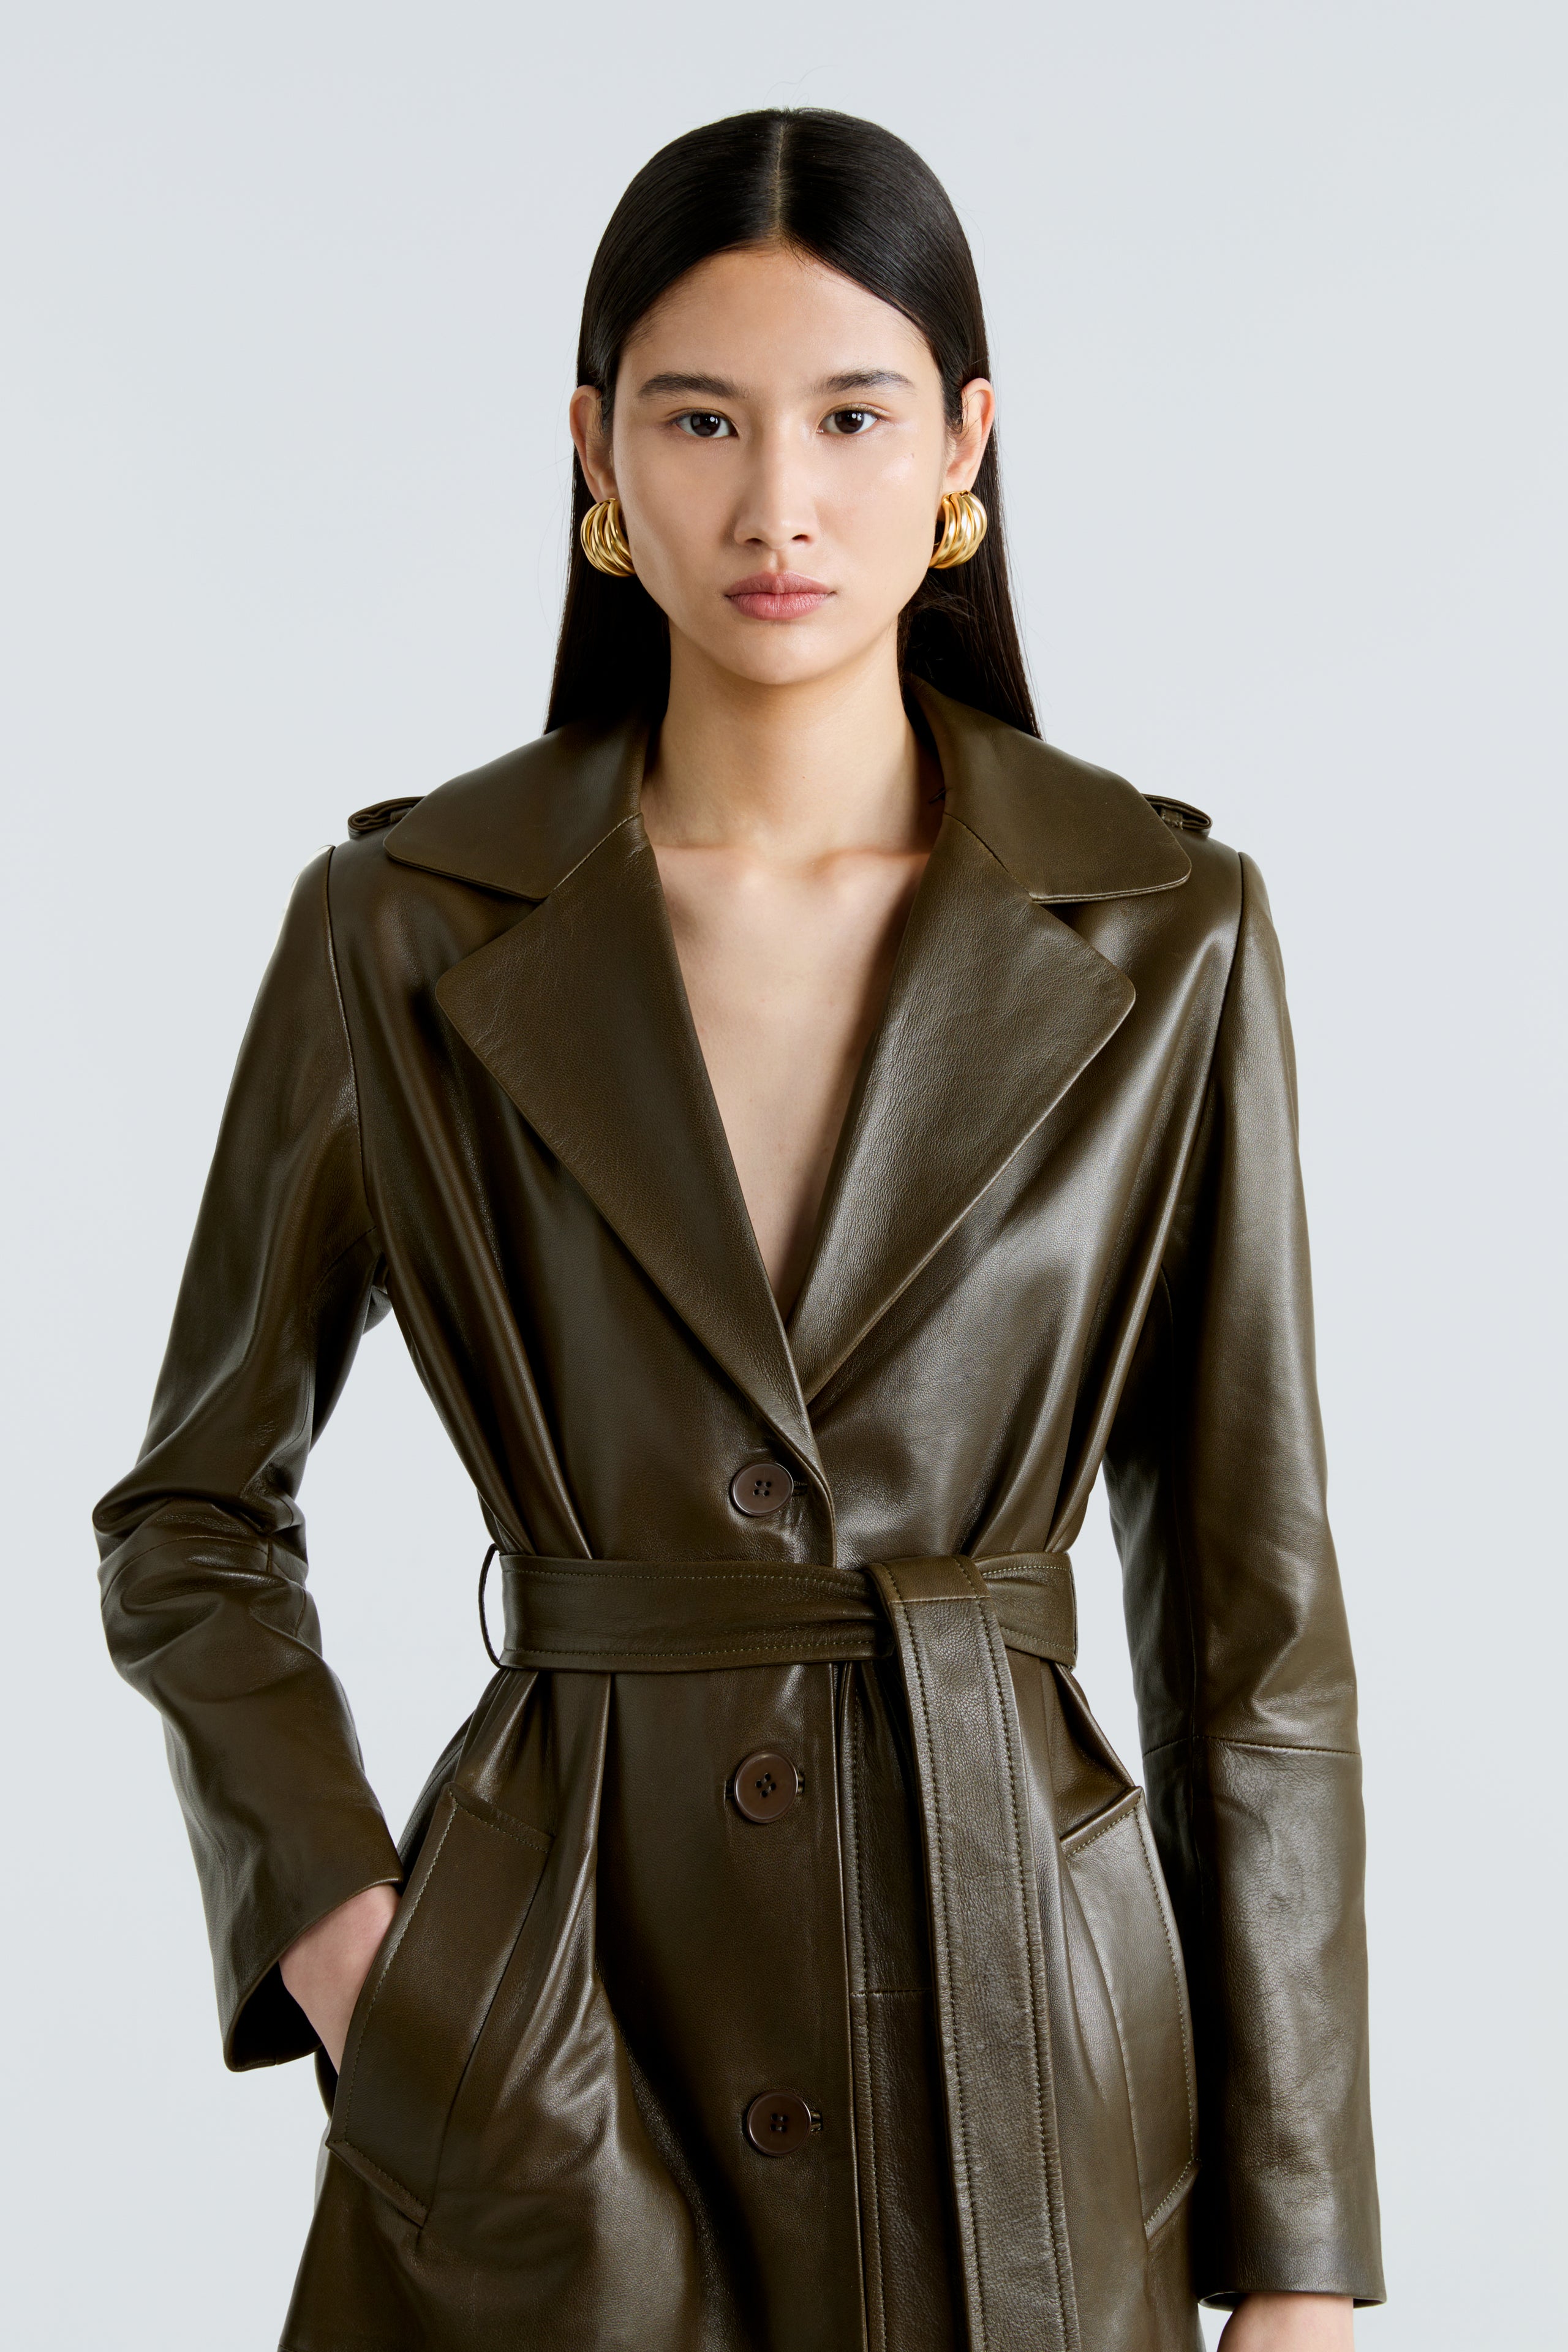 Model is wearing the Scarlett Zeytoun Belted Leather Coat Close Up